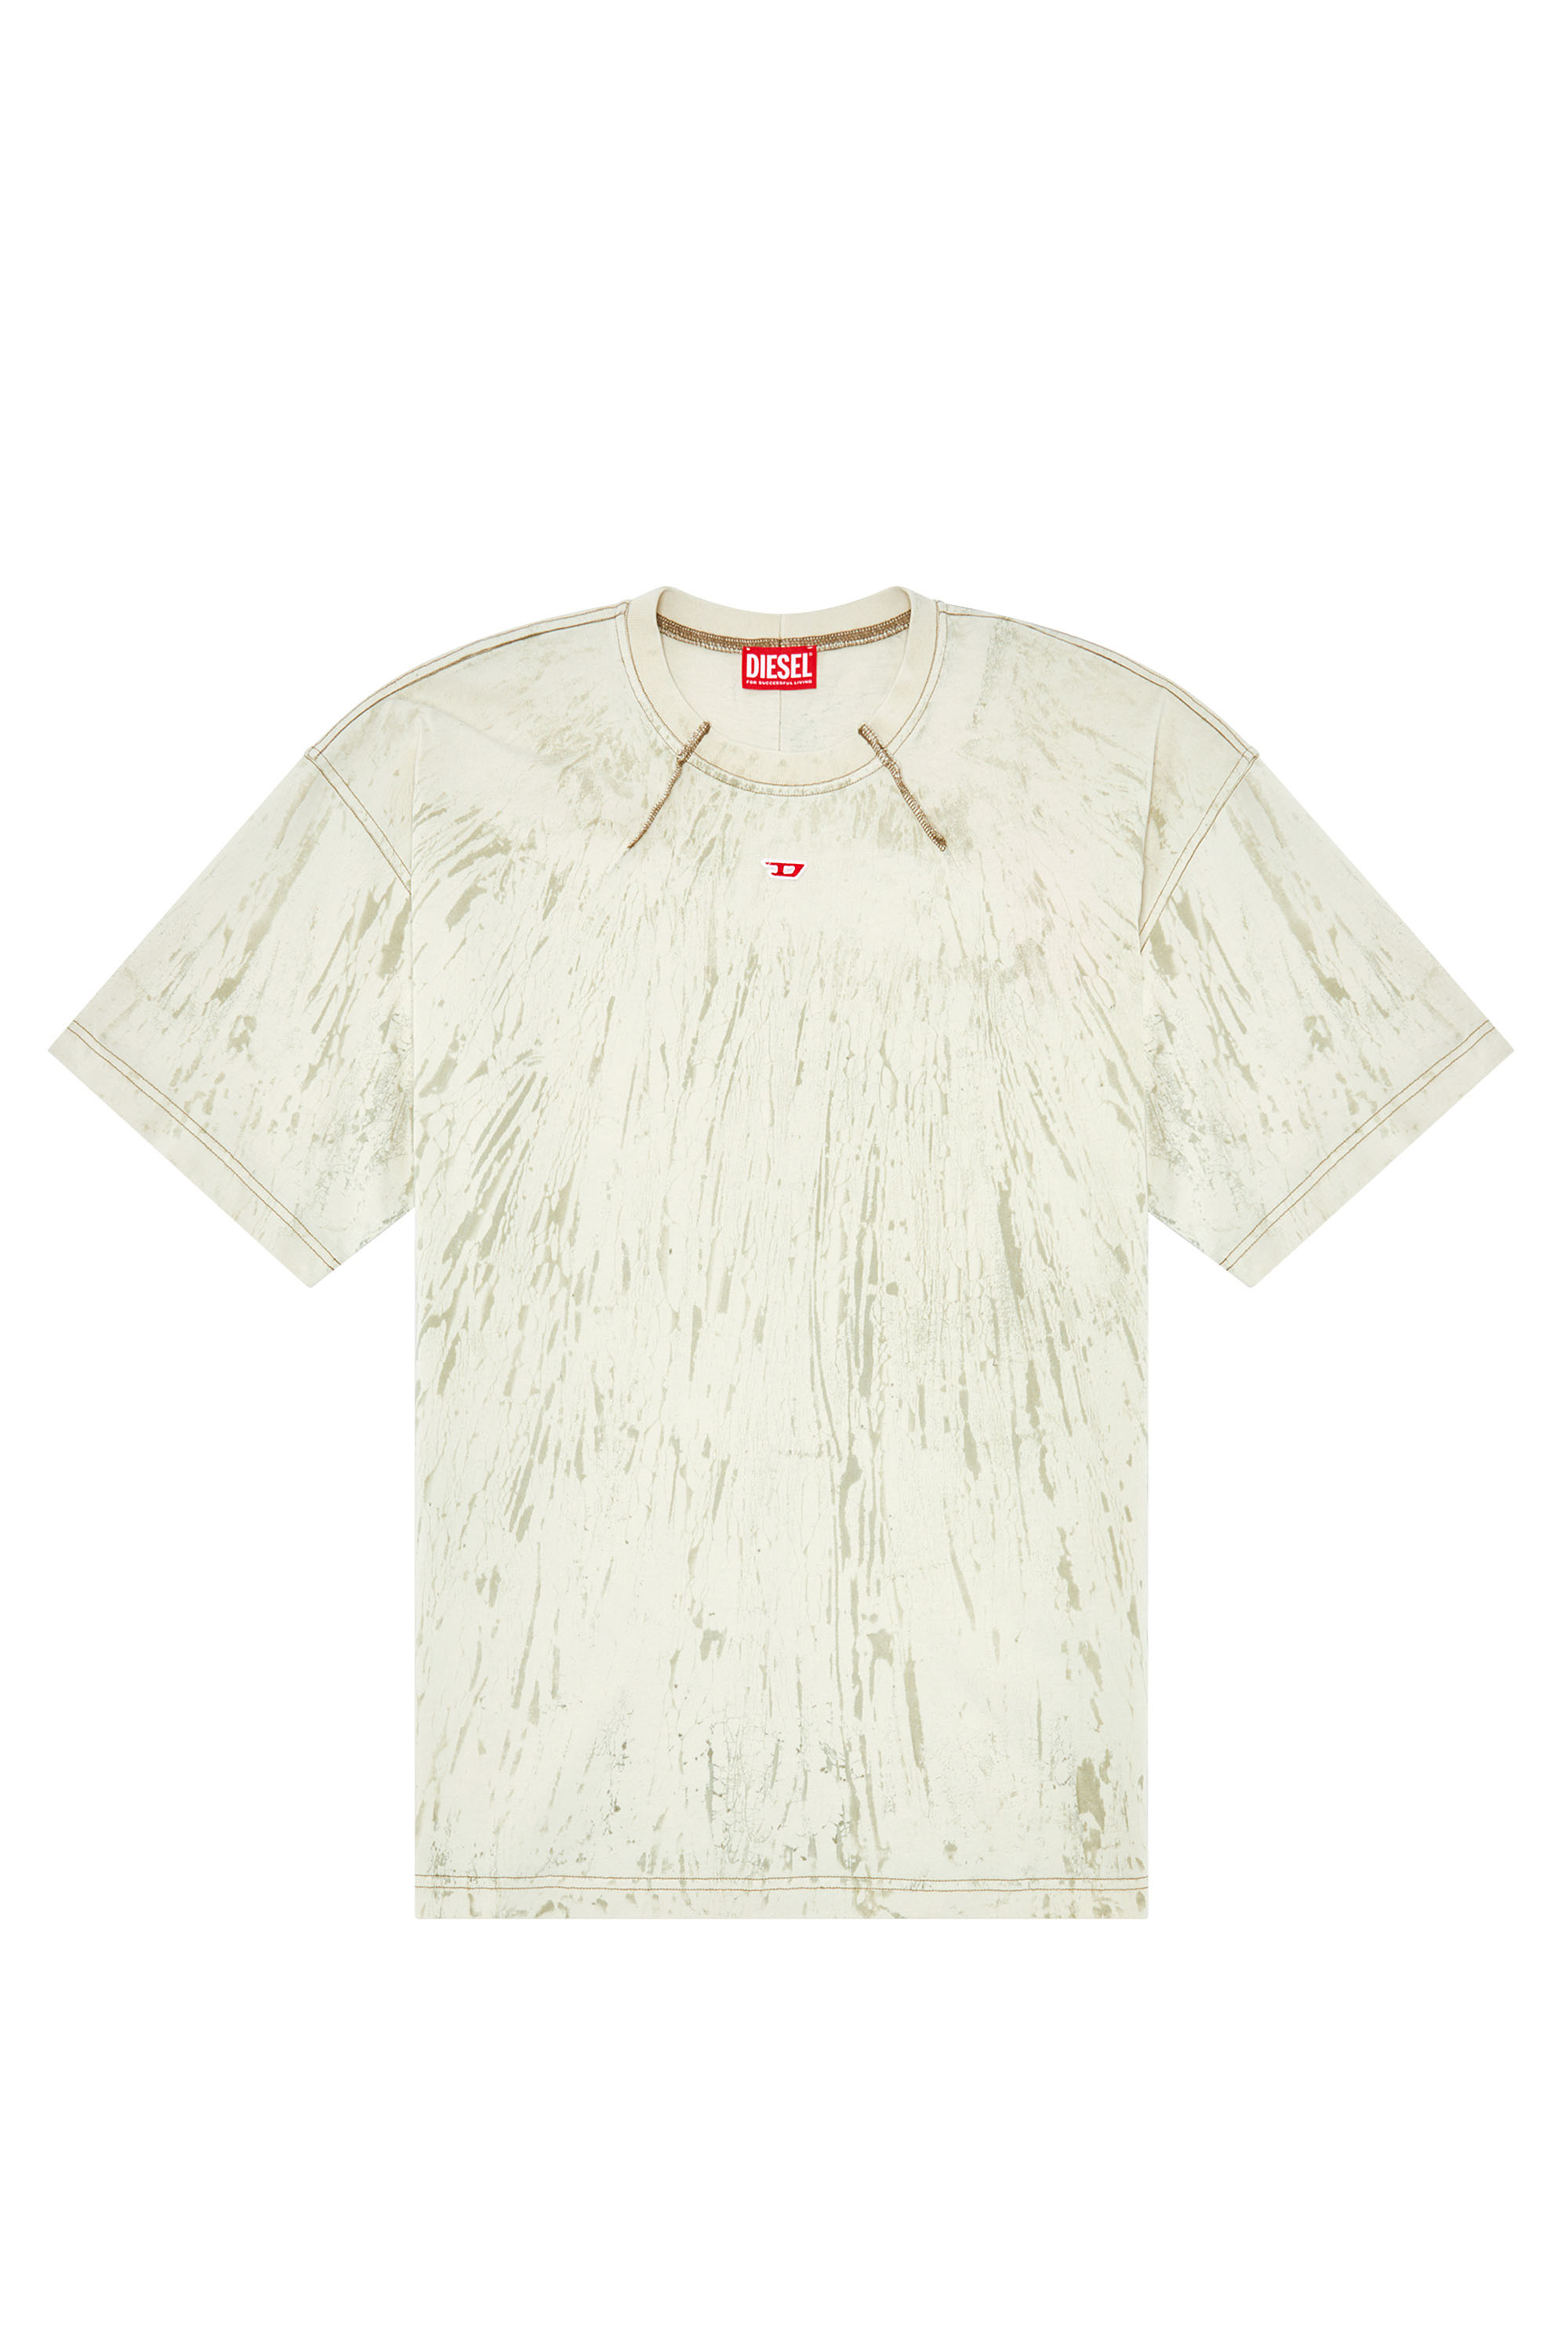 Diesel - T-COS, Man T-shirt in plaster effect jersey in White - Image 3